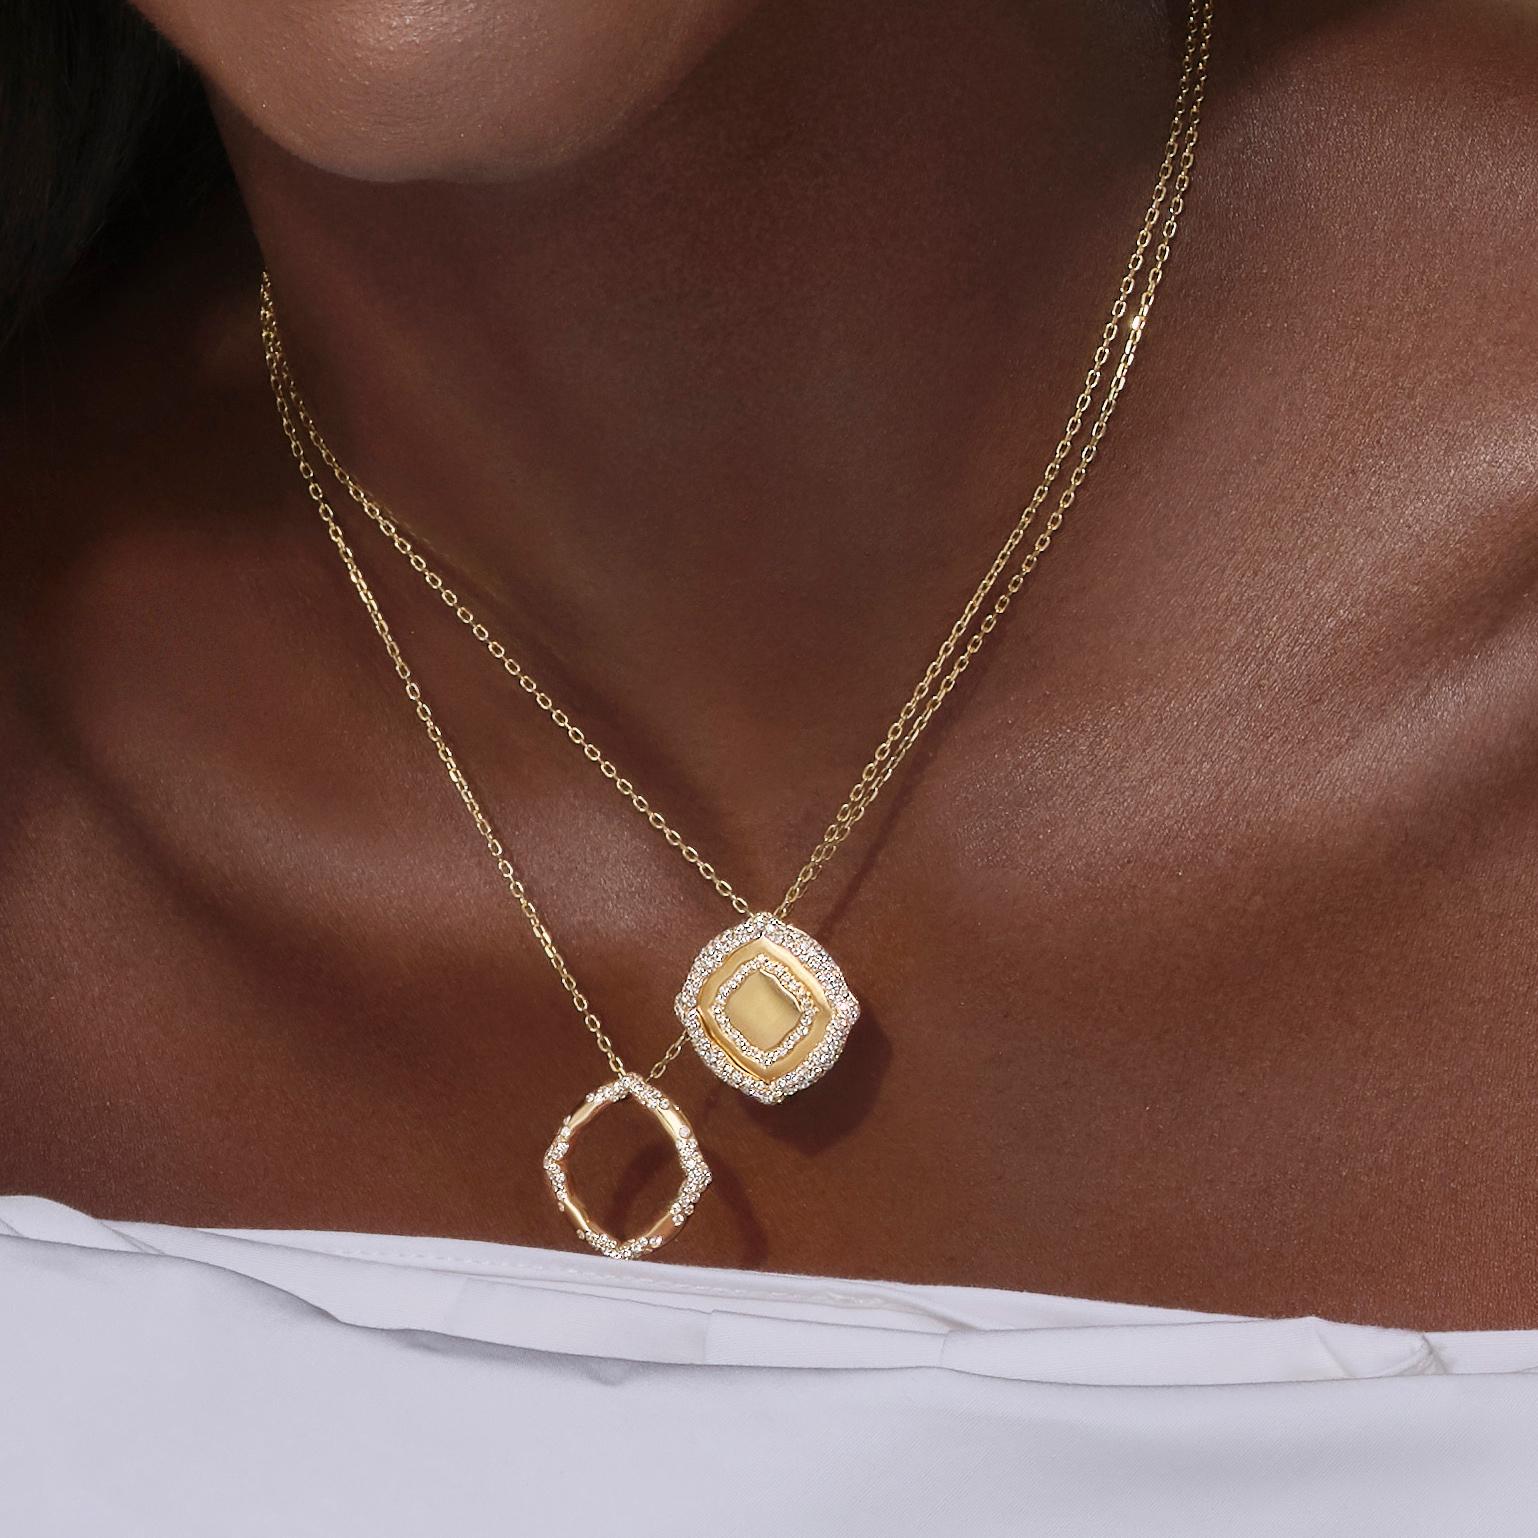 The Nile Collection is an elevated and elegant take on the exotic theme of ancient Egypt. The Nile, the longest river in the world also called the father of African rivers, served as inspiration to Vania Leles for this collection.
Each piece from